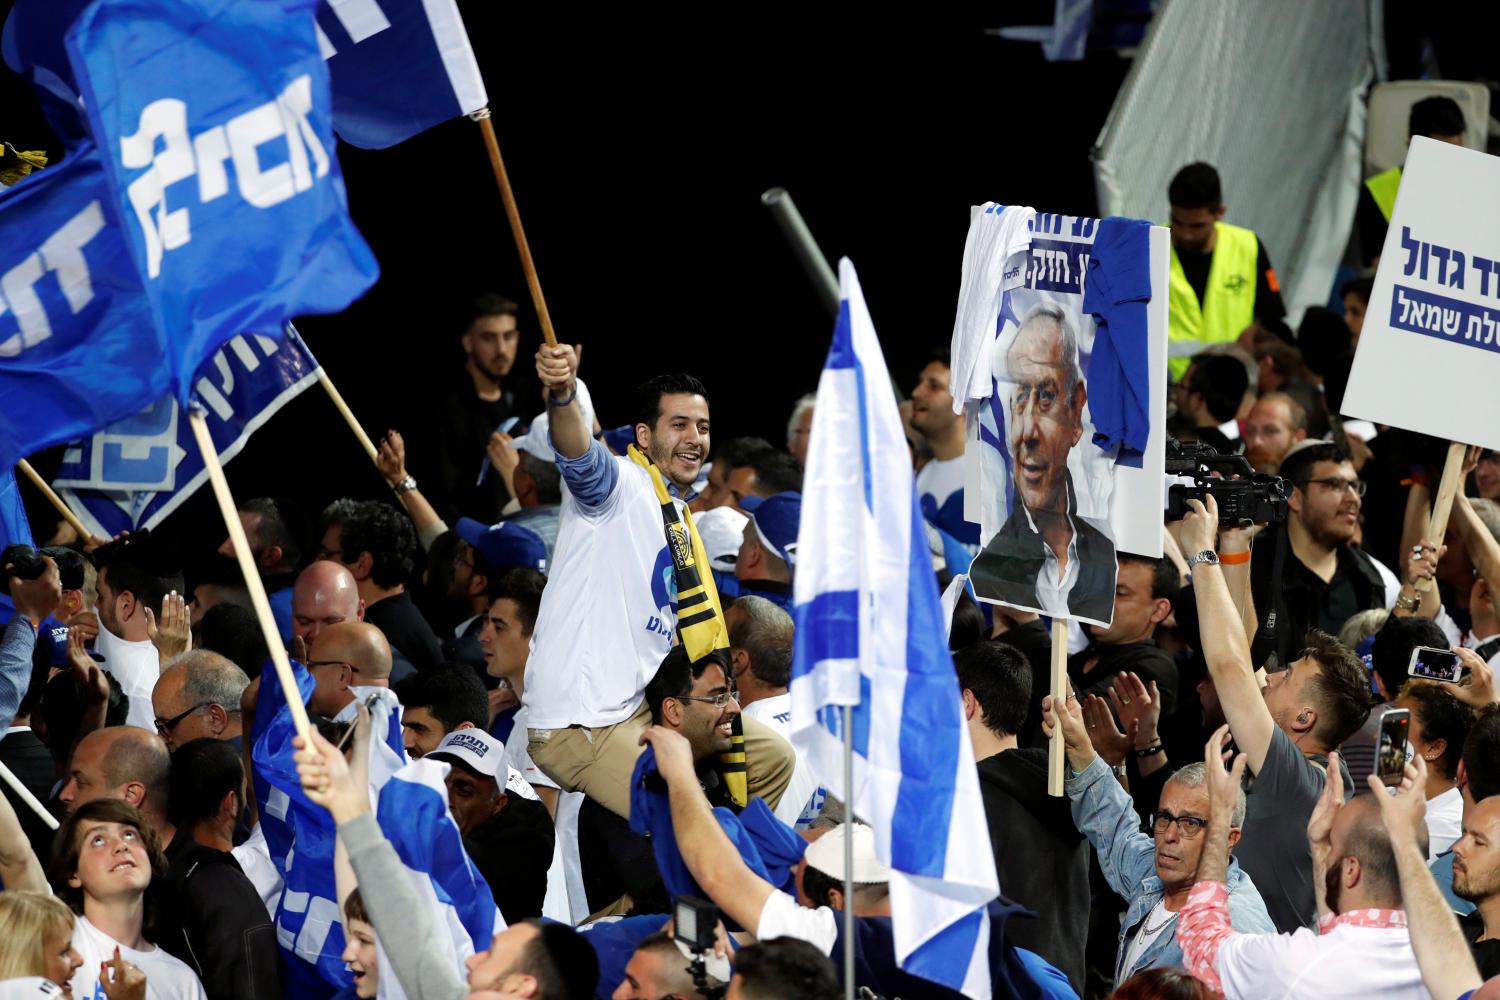 Supporters of Israeli Prime Minister Benjamin Netanyahu's Likud party react to exit polls in Israel's parliamentary election at the party headquarters in Tel Aviv, Israel April 10, 2019. REUTERS/Ronen Zvulun - RC1E78CE7370